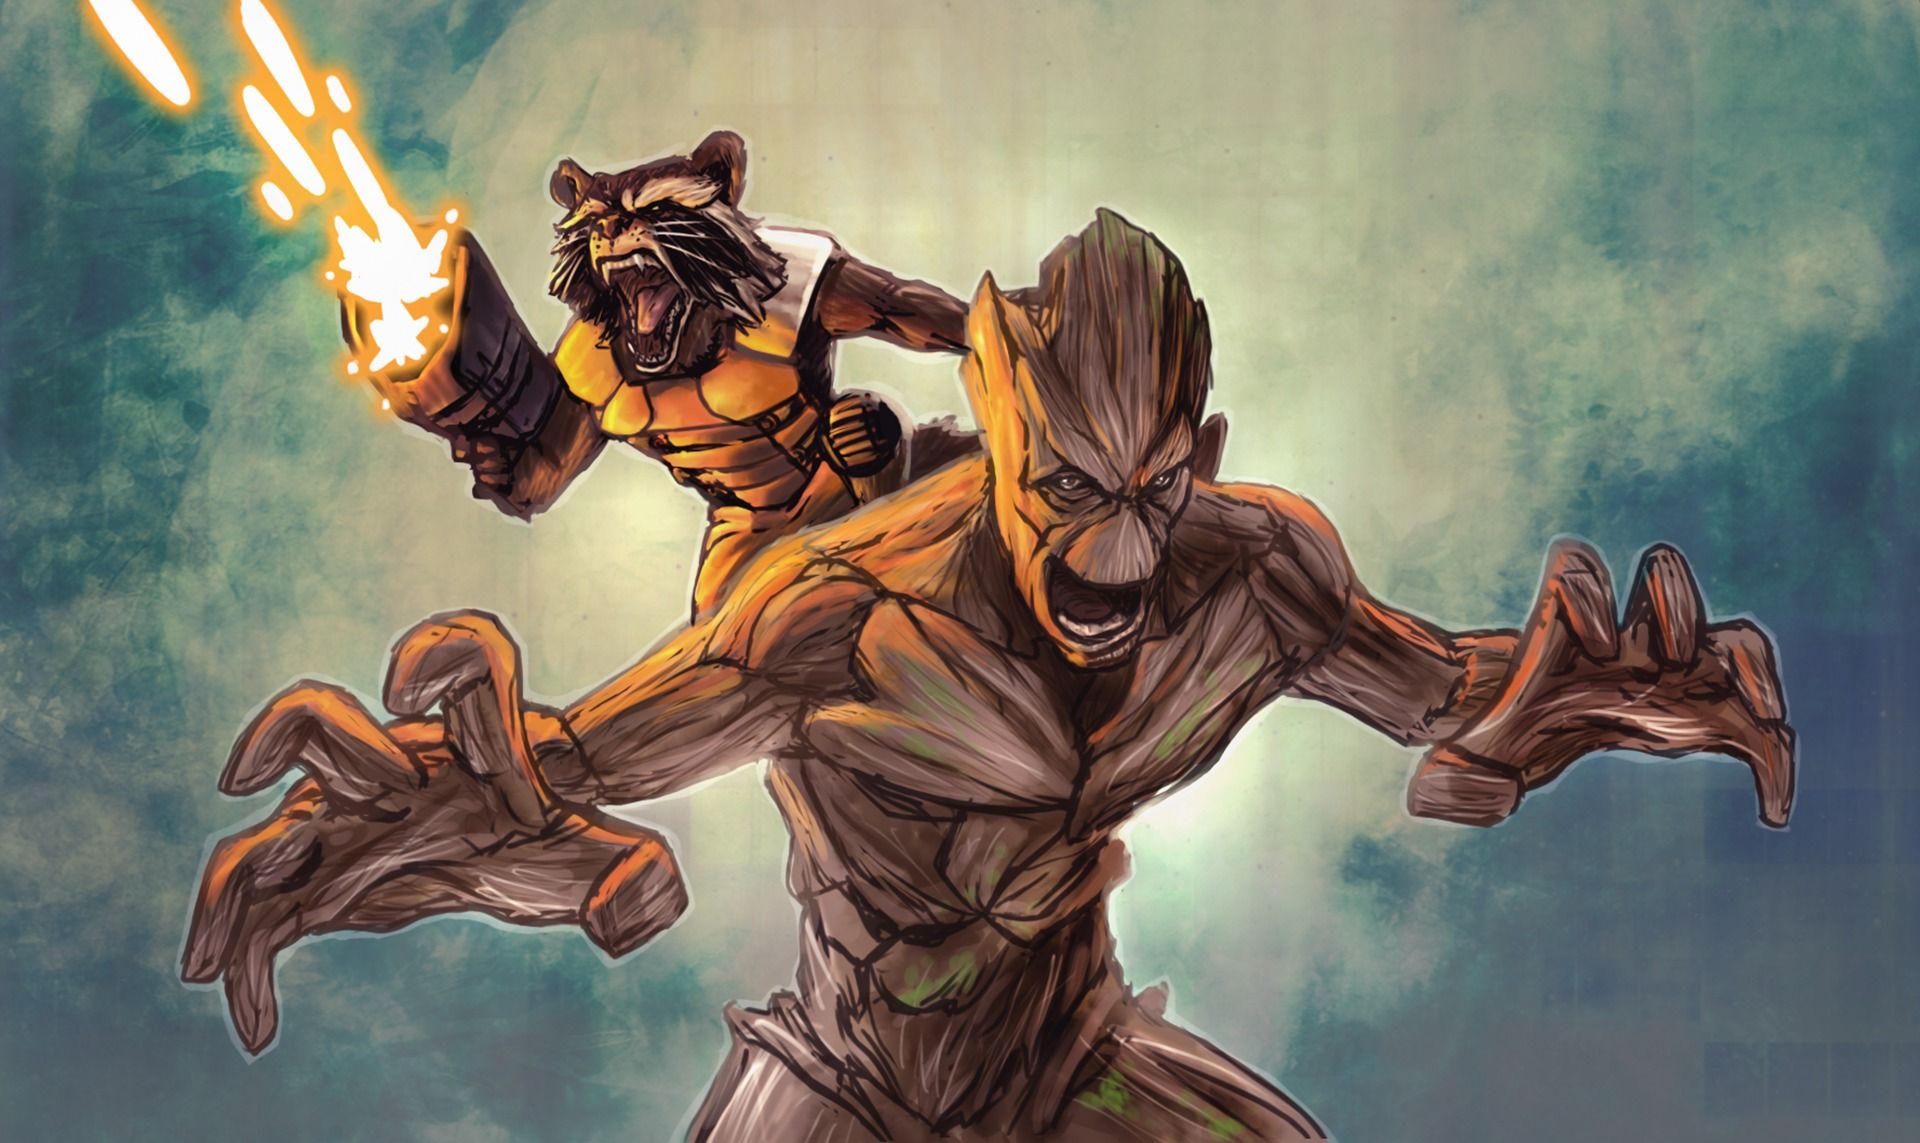 Free download By Stephen Comments Off on Guardians Of The Galaxy